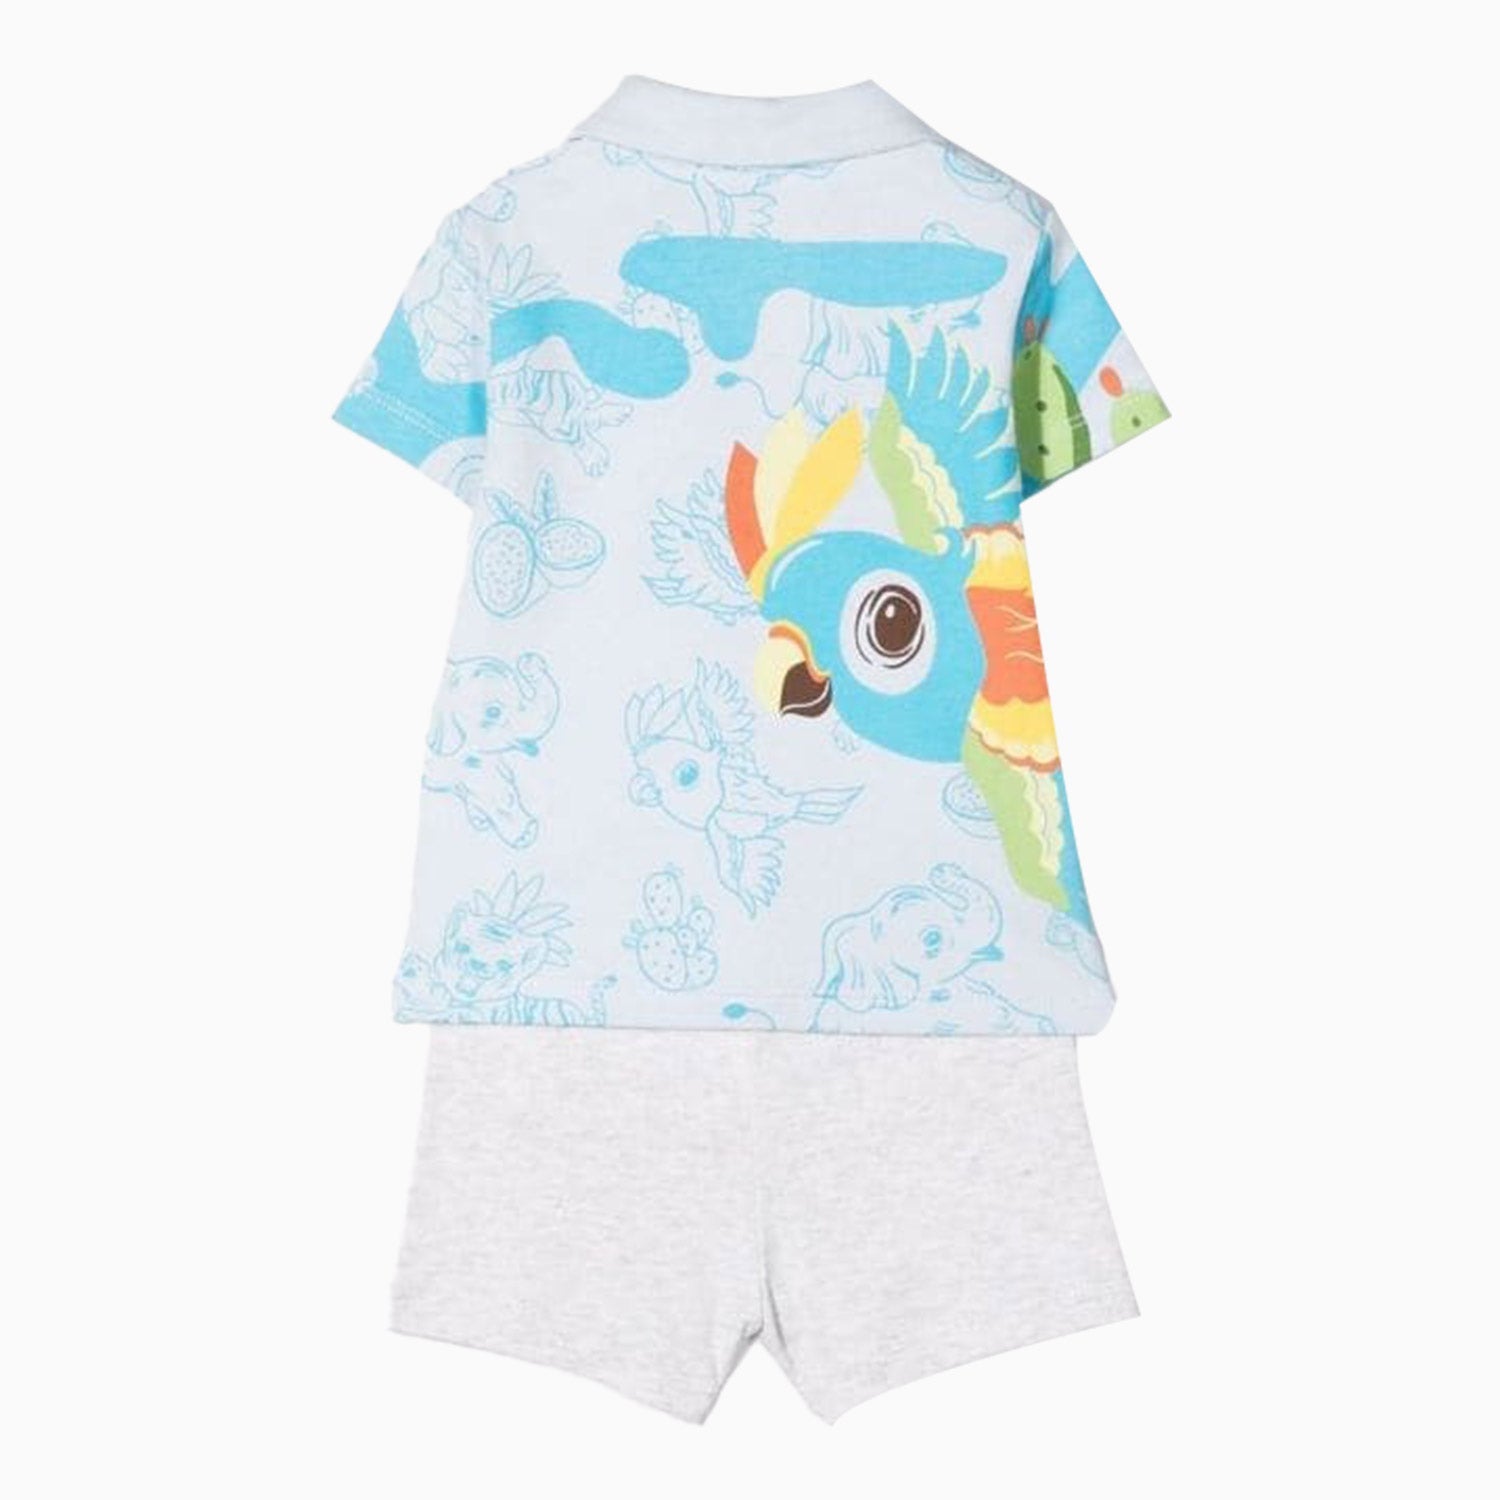 Kenzo Kid's Polo Shirt And Short Outfit - Color: Pale Blue - Kids Premium Clothing -